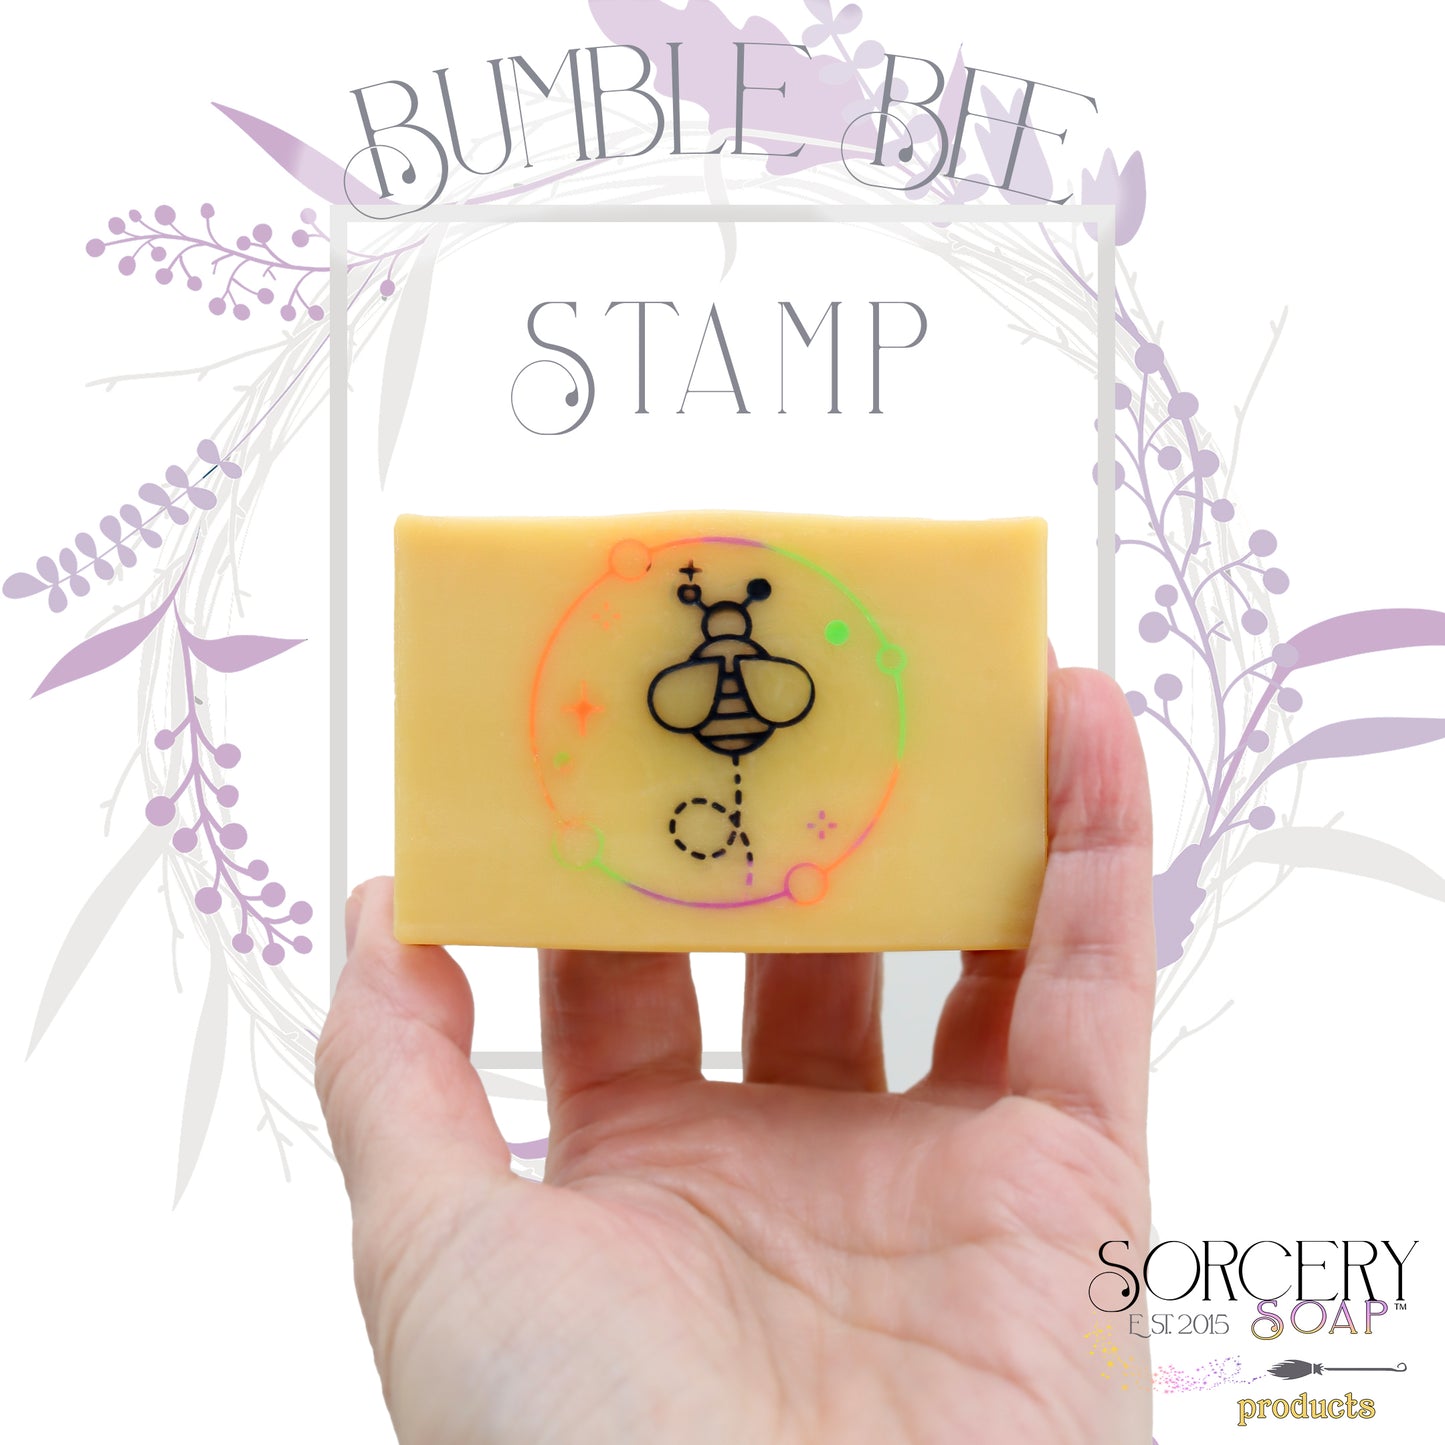 Bumble Bee Stamp